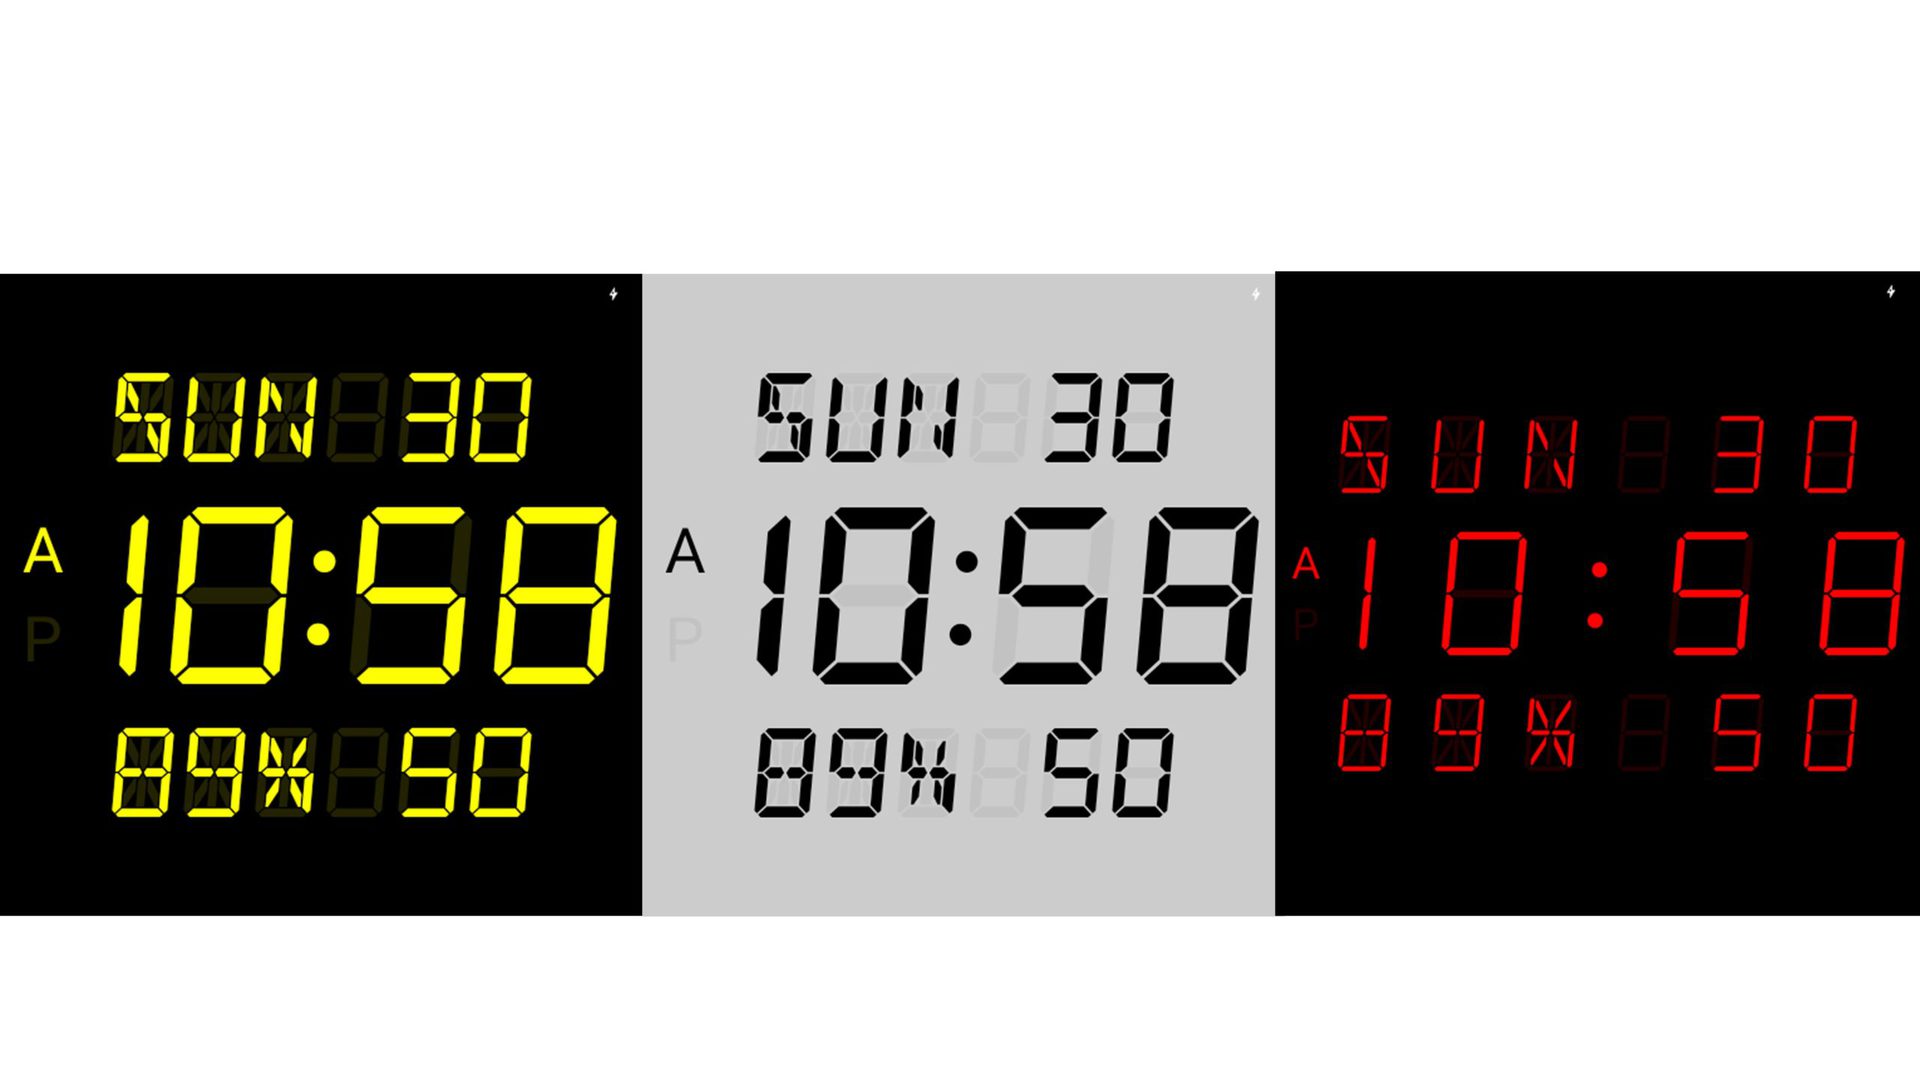 Screenshots of the LED Watch 3000 from the Google Play Store highlighting the vintage vibe of the design.